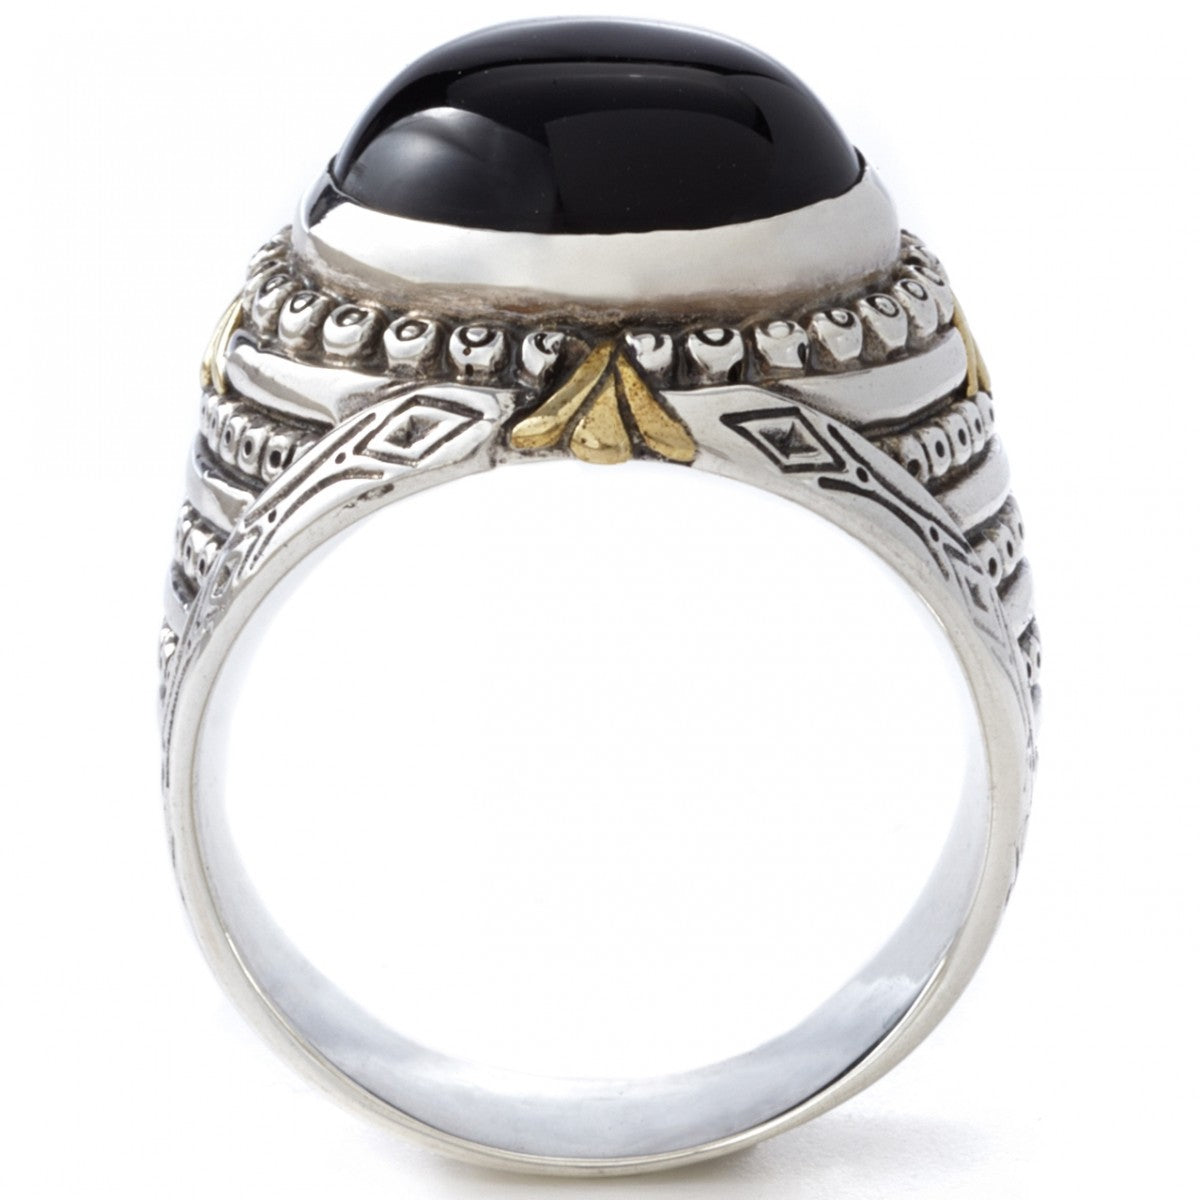 Konstantino Men's Sterling Silver and Black Onyx Ring, Size 10